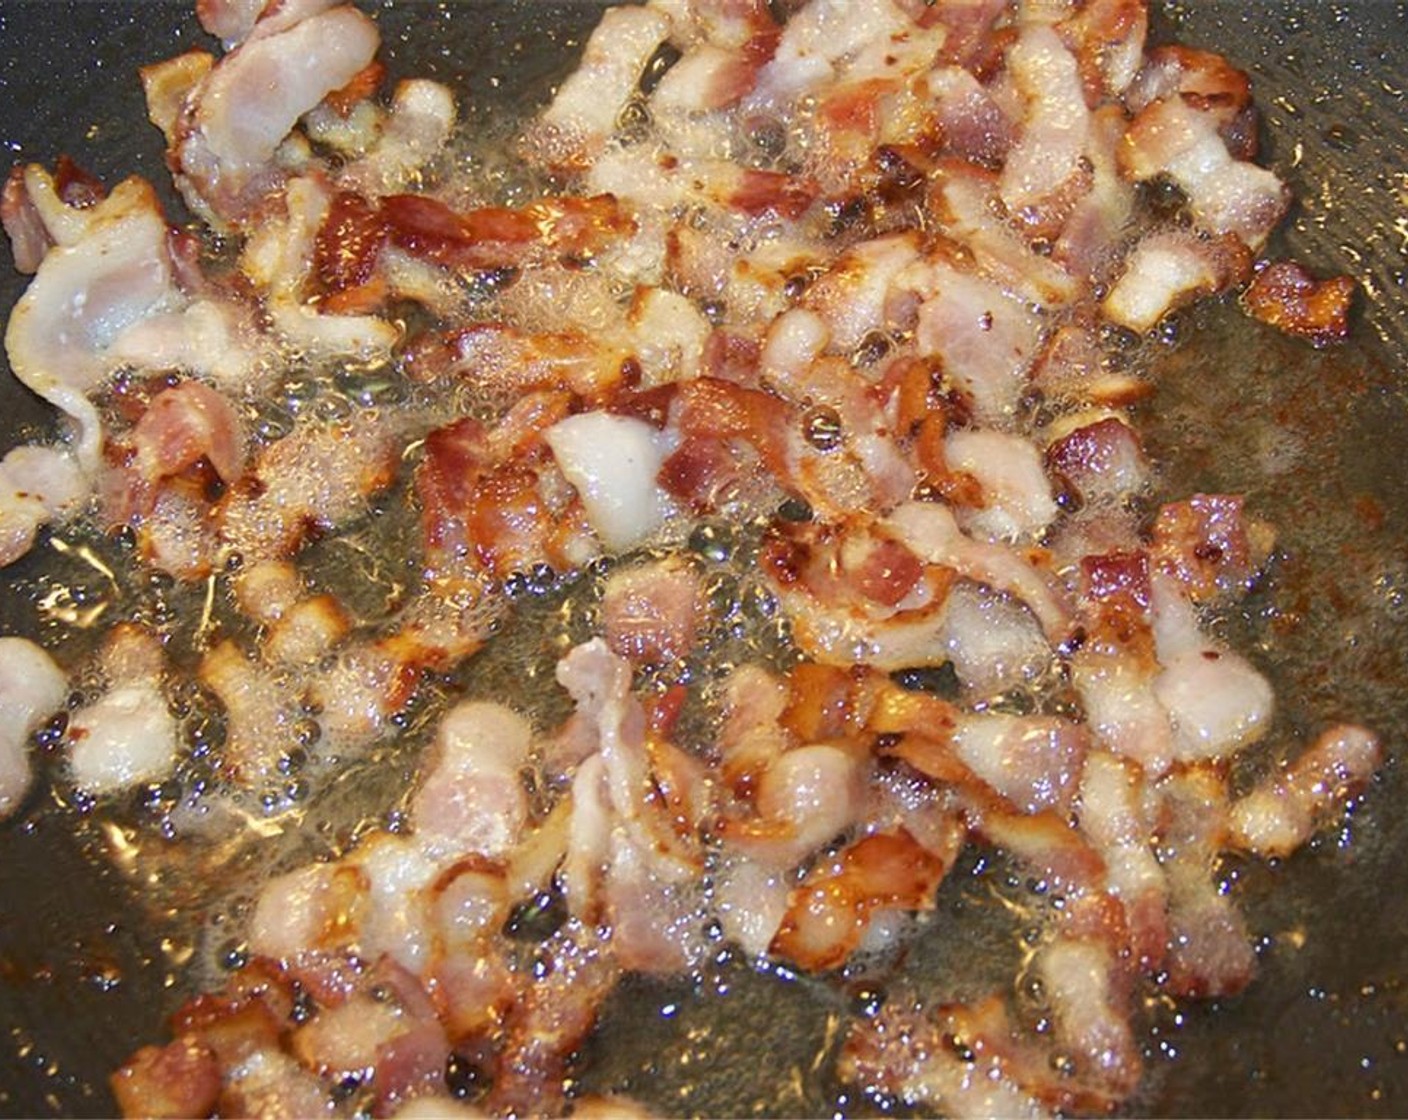 step 1 Chop the Bacon (10 slices) into pieces. In a medium skillet, fry it on medium heat until crispy.